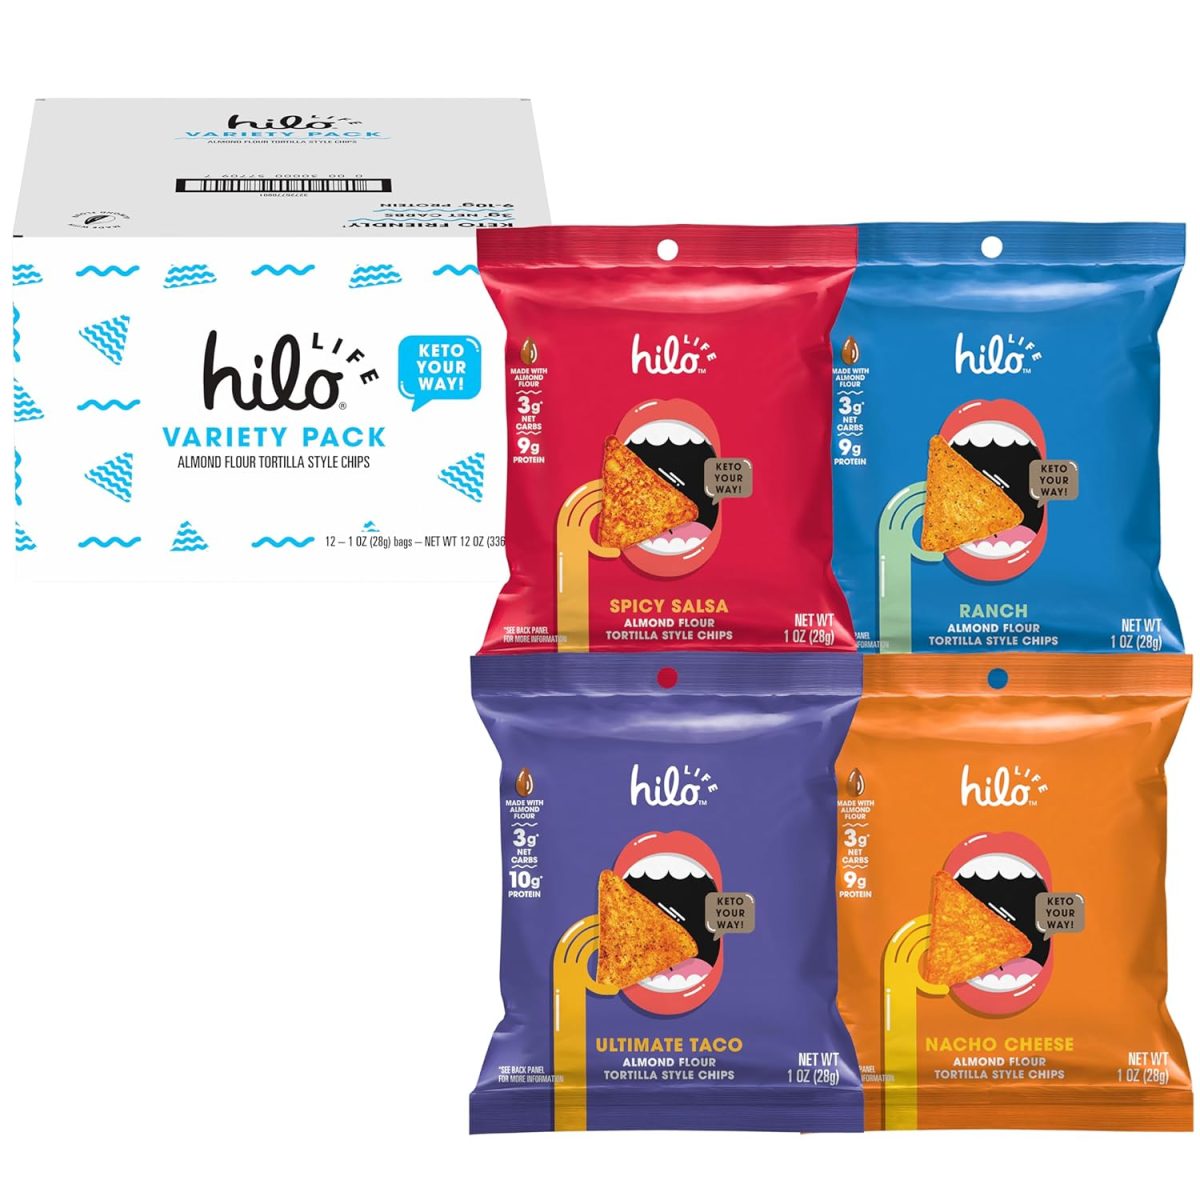 Hilo Life Low Carb Keto Friendly Tortilla Chip Snack Bags,